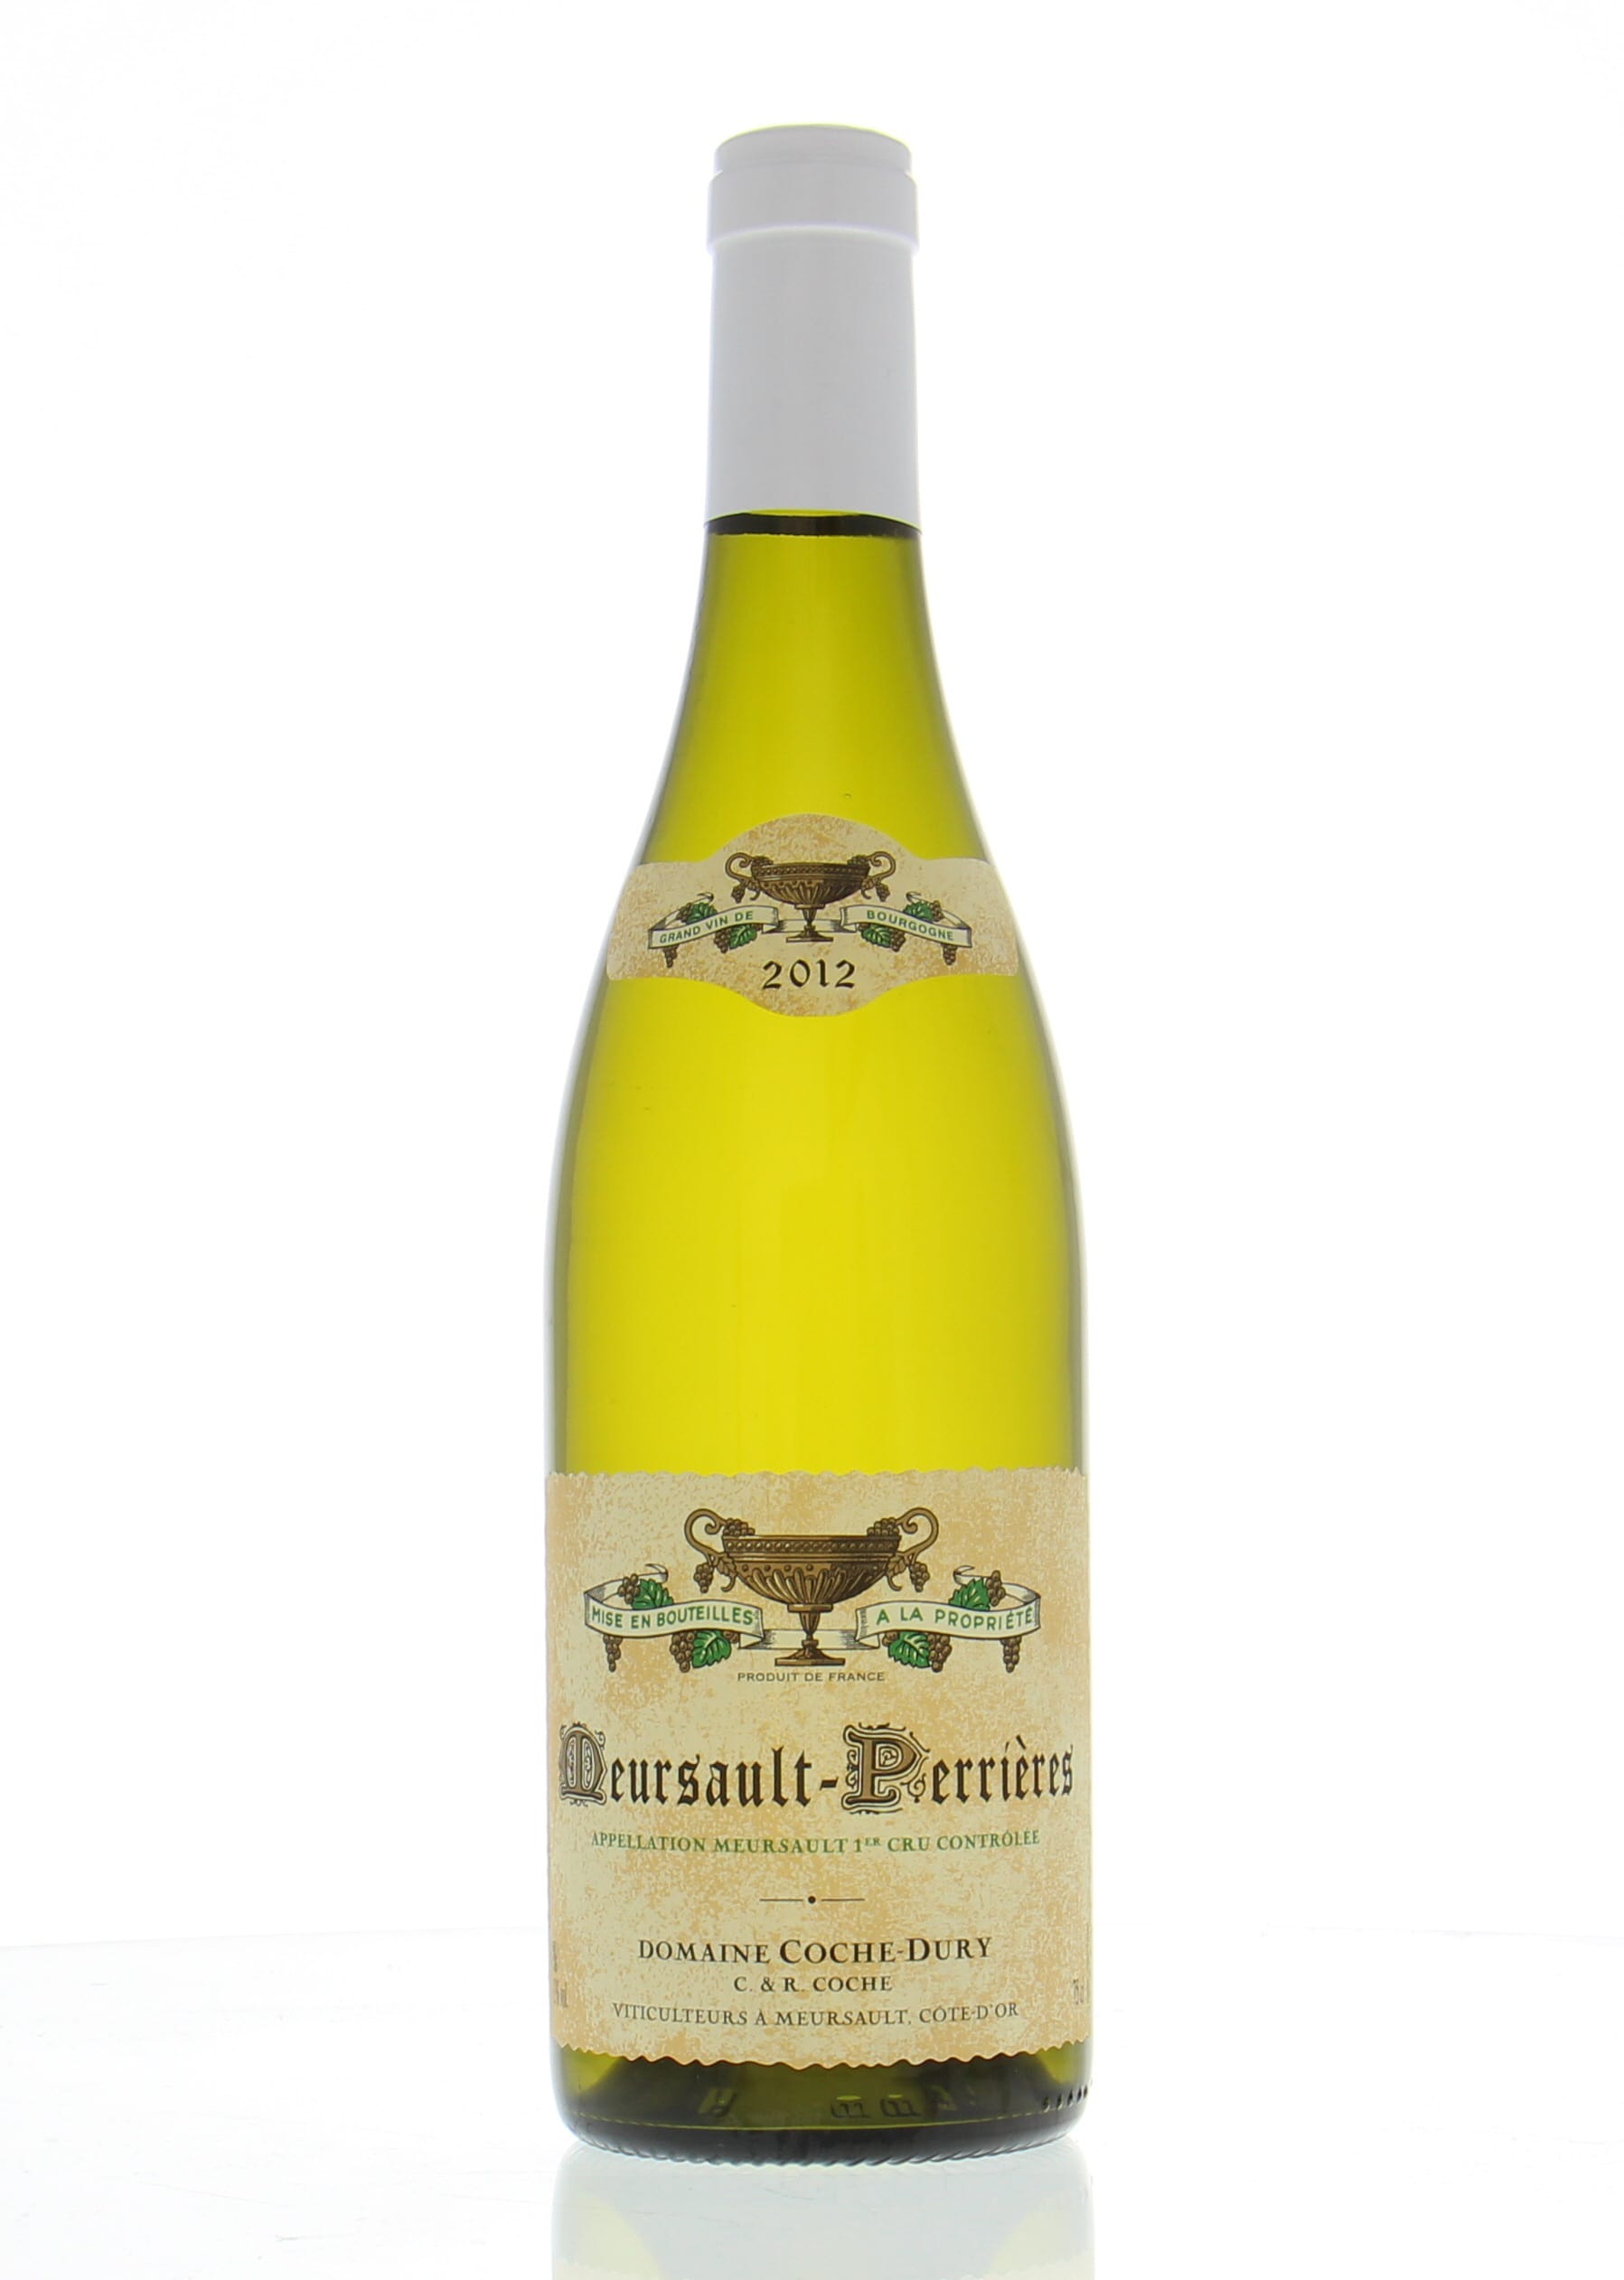 Coche Dury - Meursault Perrieres 2012 Perfect